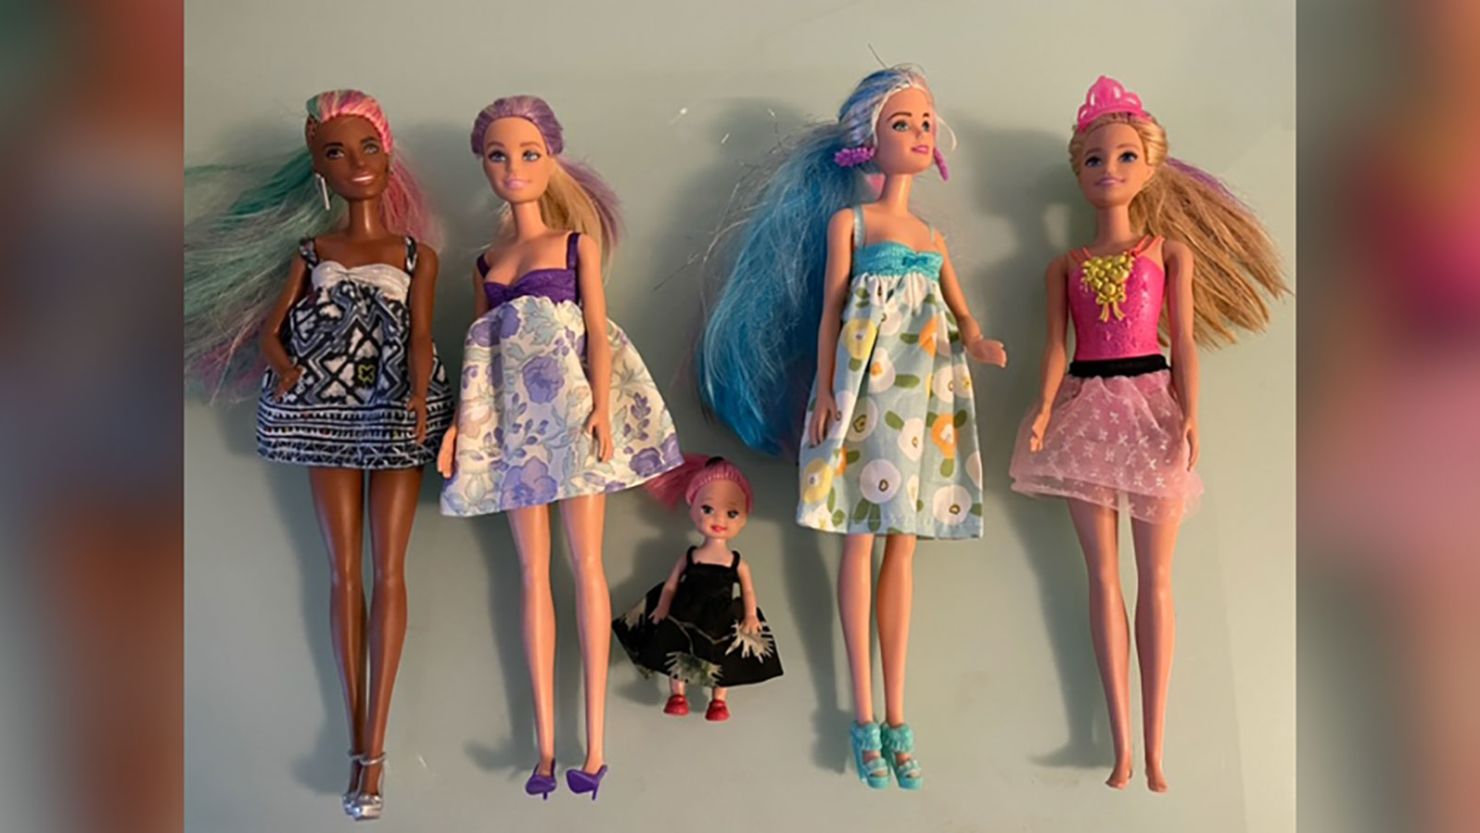 New York woman Barbara Lakin restores old Barbies for migrant girls